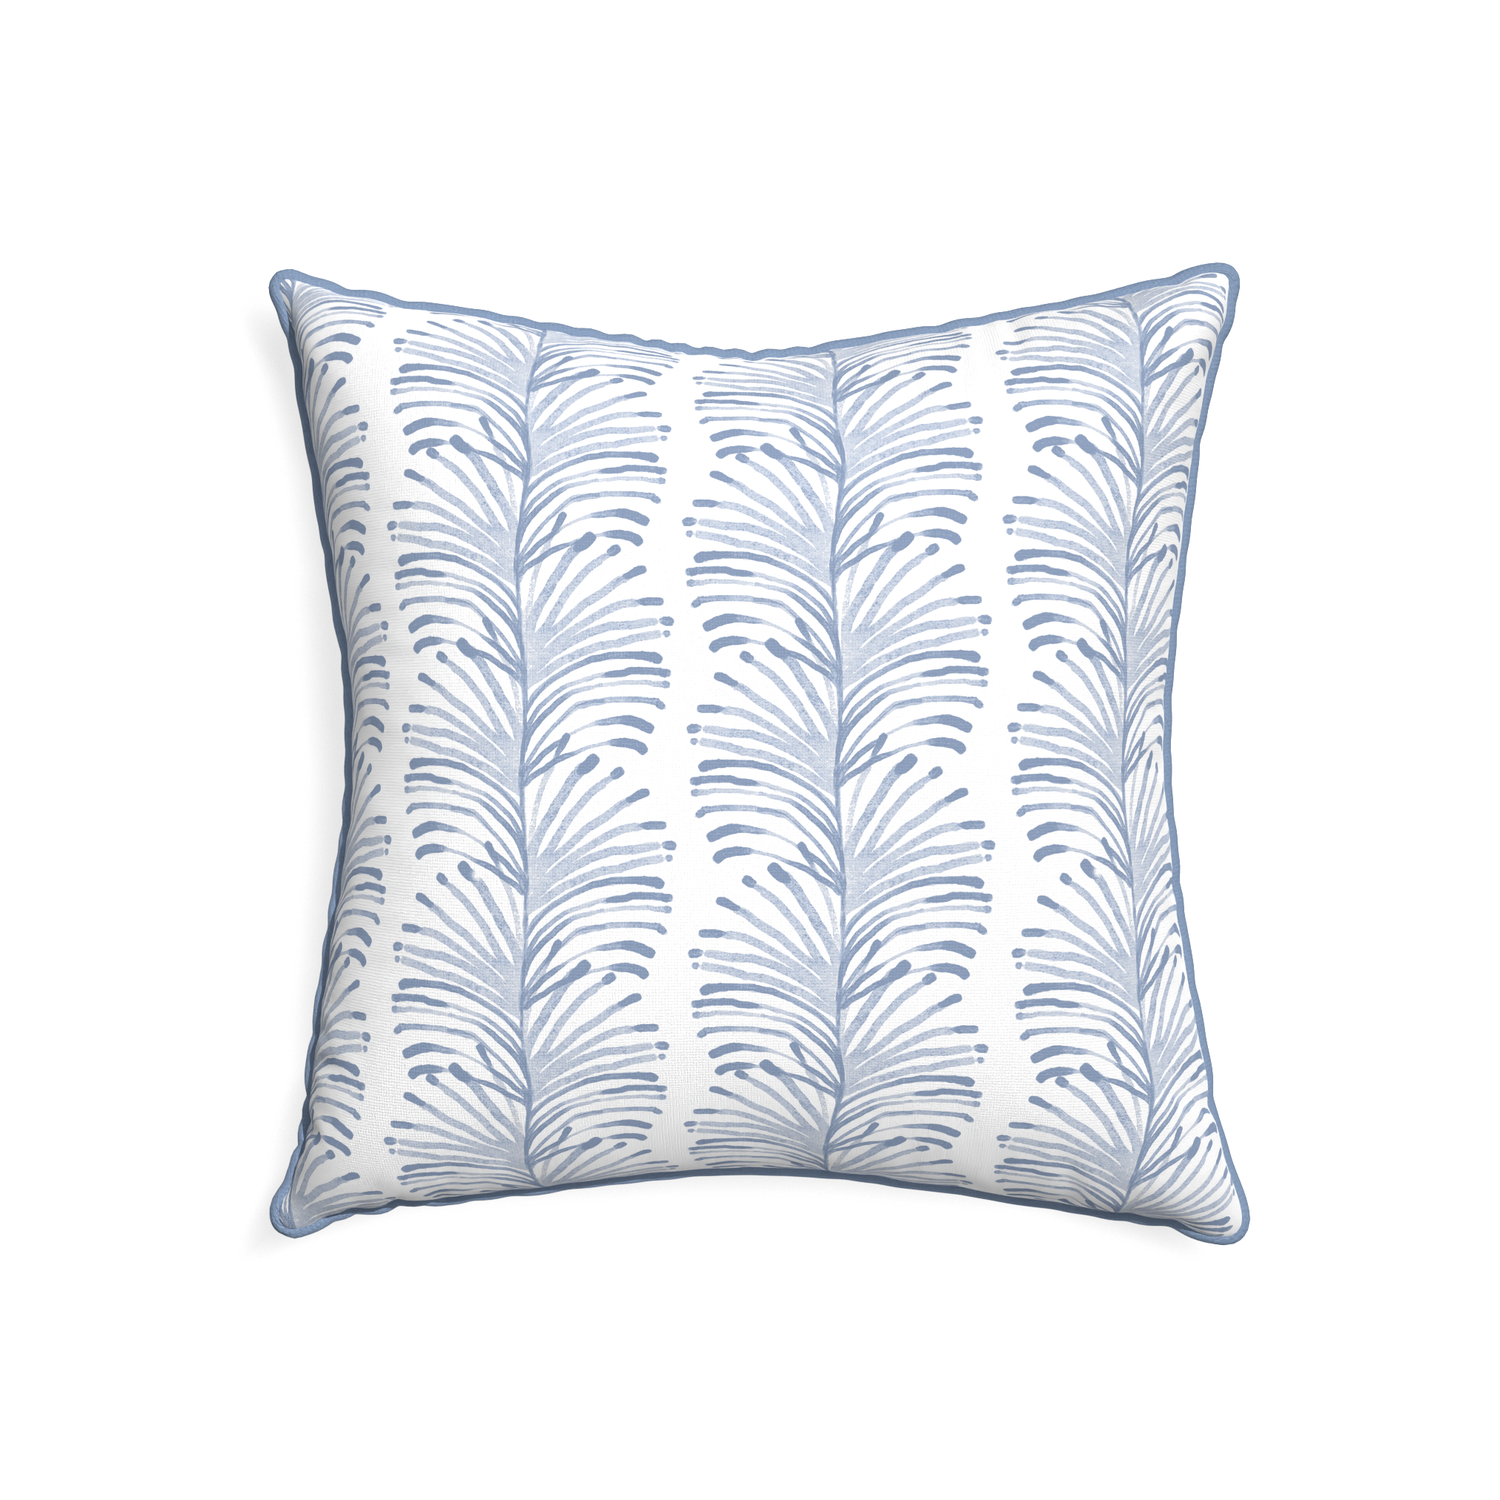 22-square emma sky custom pillow with sky piping on white background